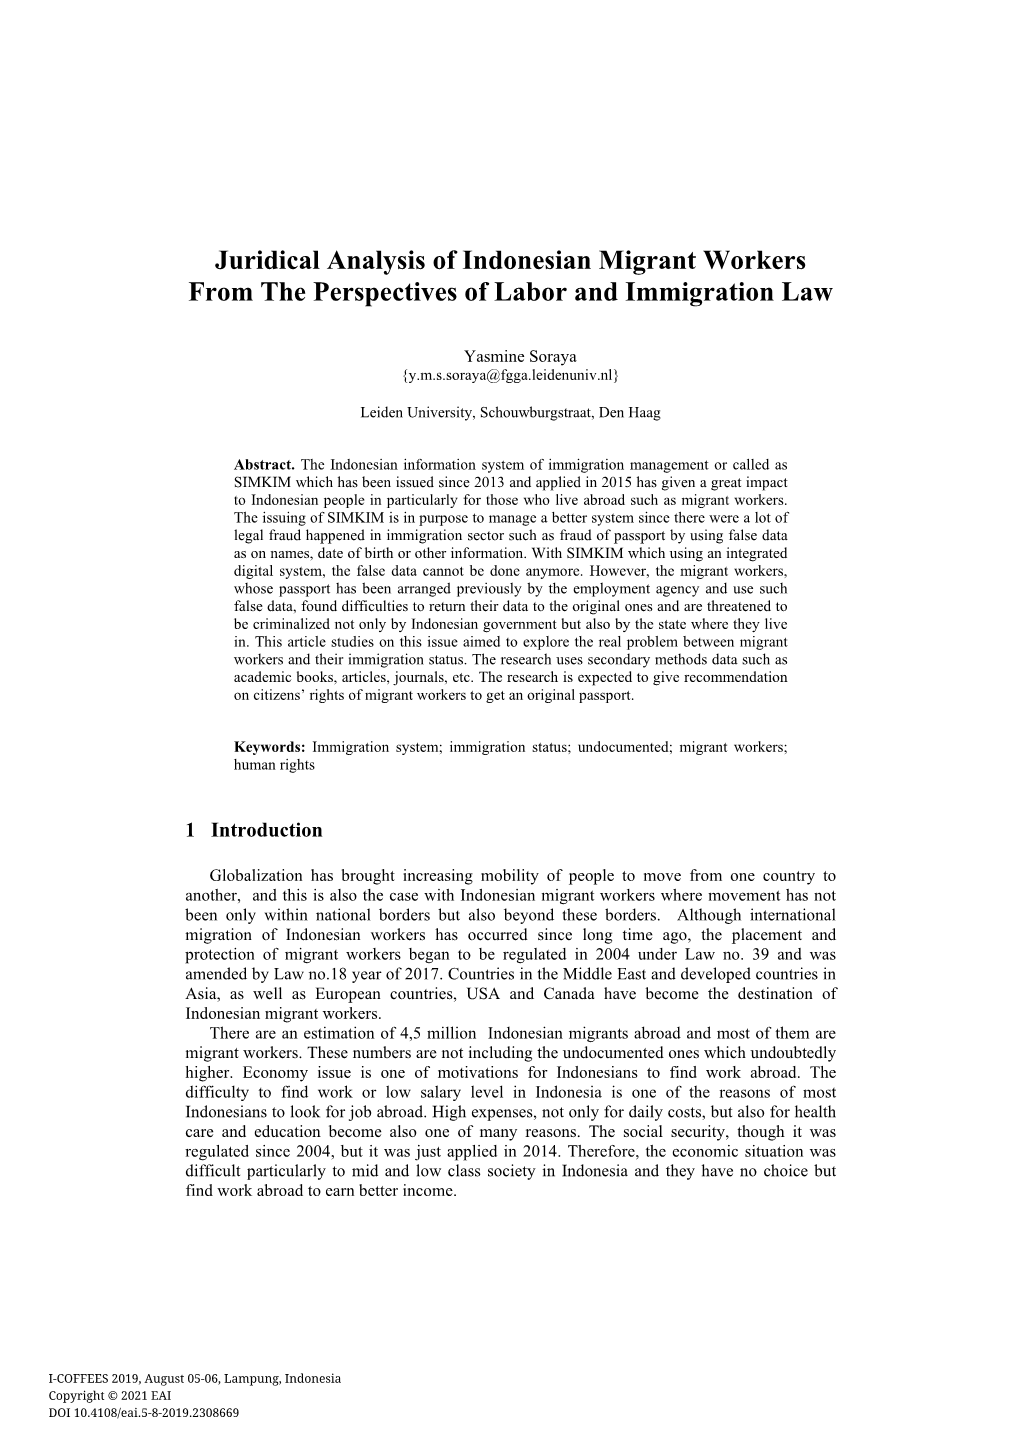 Juridical Analysis of Indonesian Migrant Workers from the Perspectives of Labor and Immigration Law